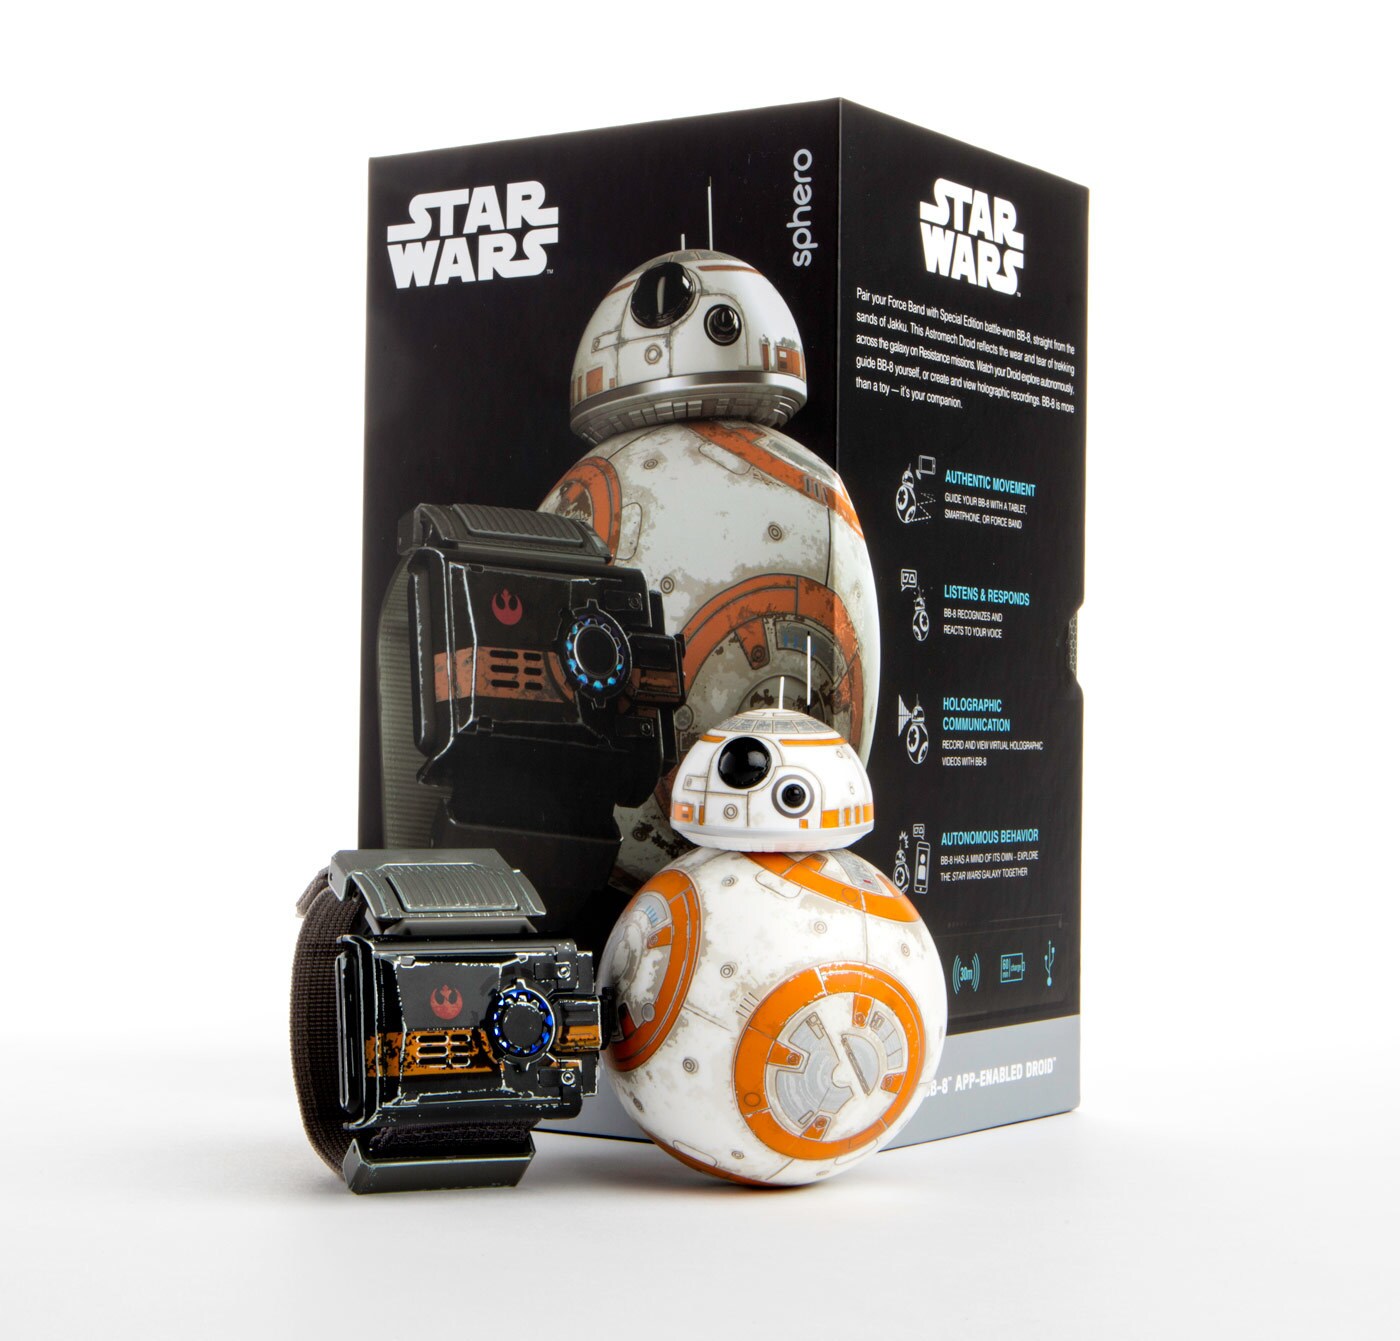 Go Rogue Pre-Order: Star Wars Force Band and Special Edition Battle-Worn BB-8 Droid Bundle